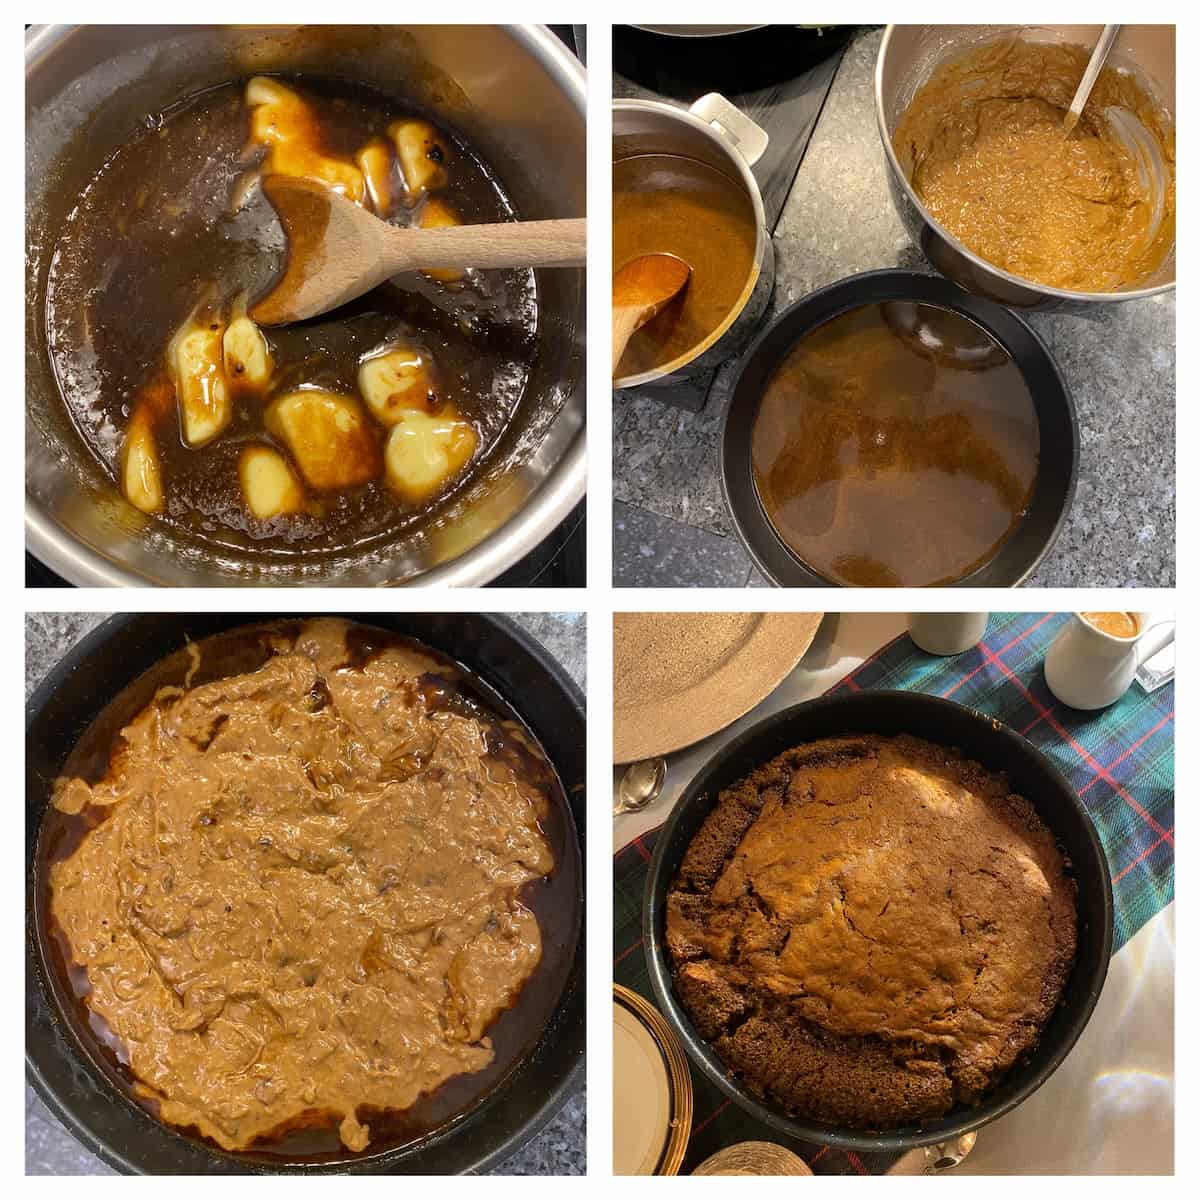 steps in making a toffee sauce and adding it to cake batter